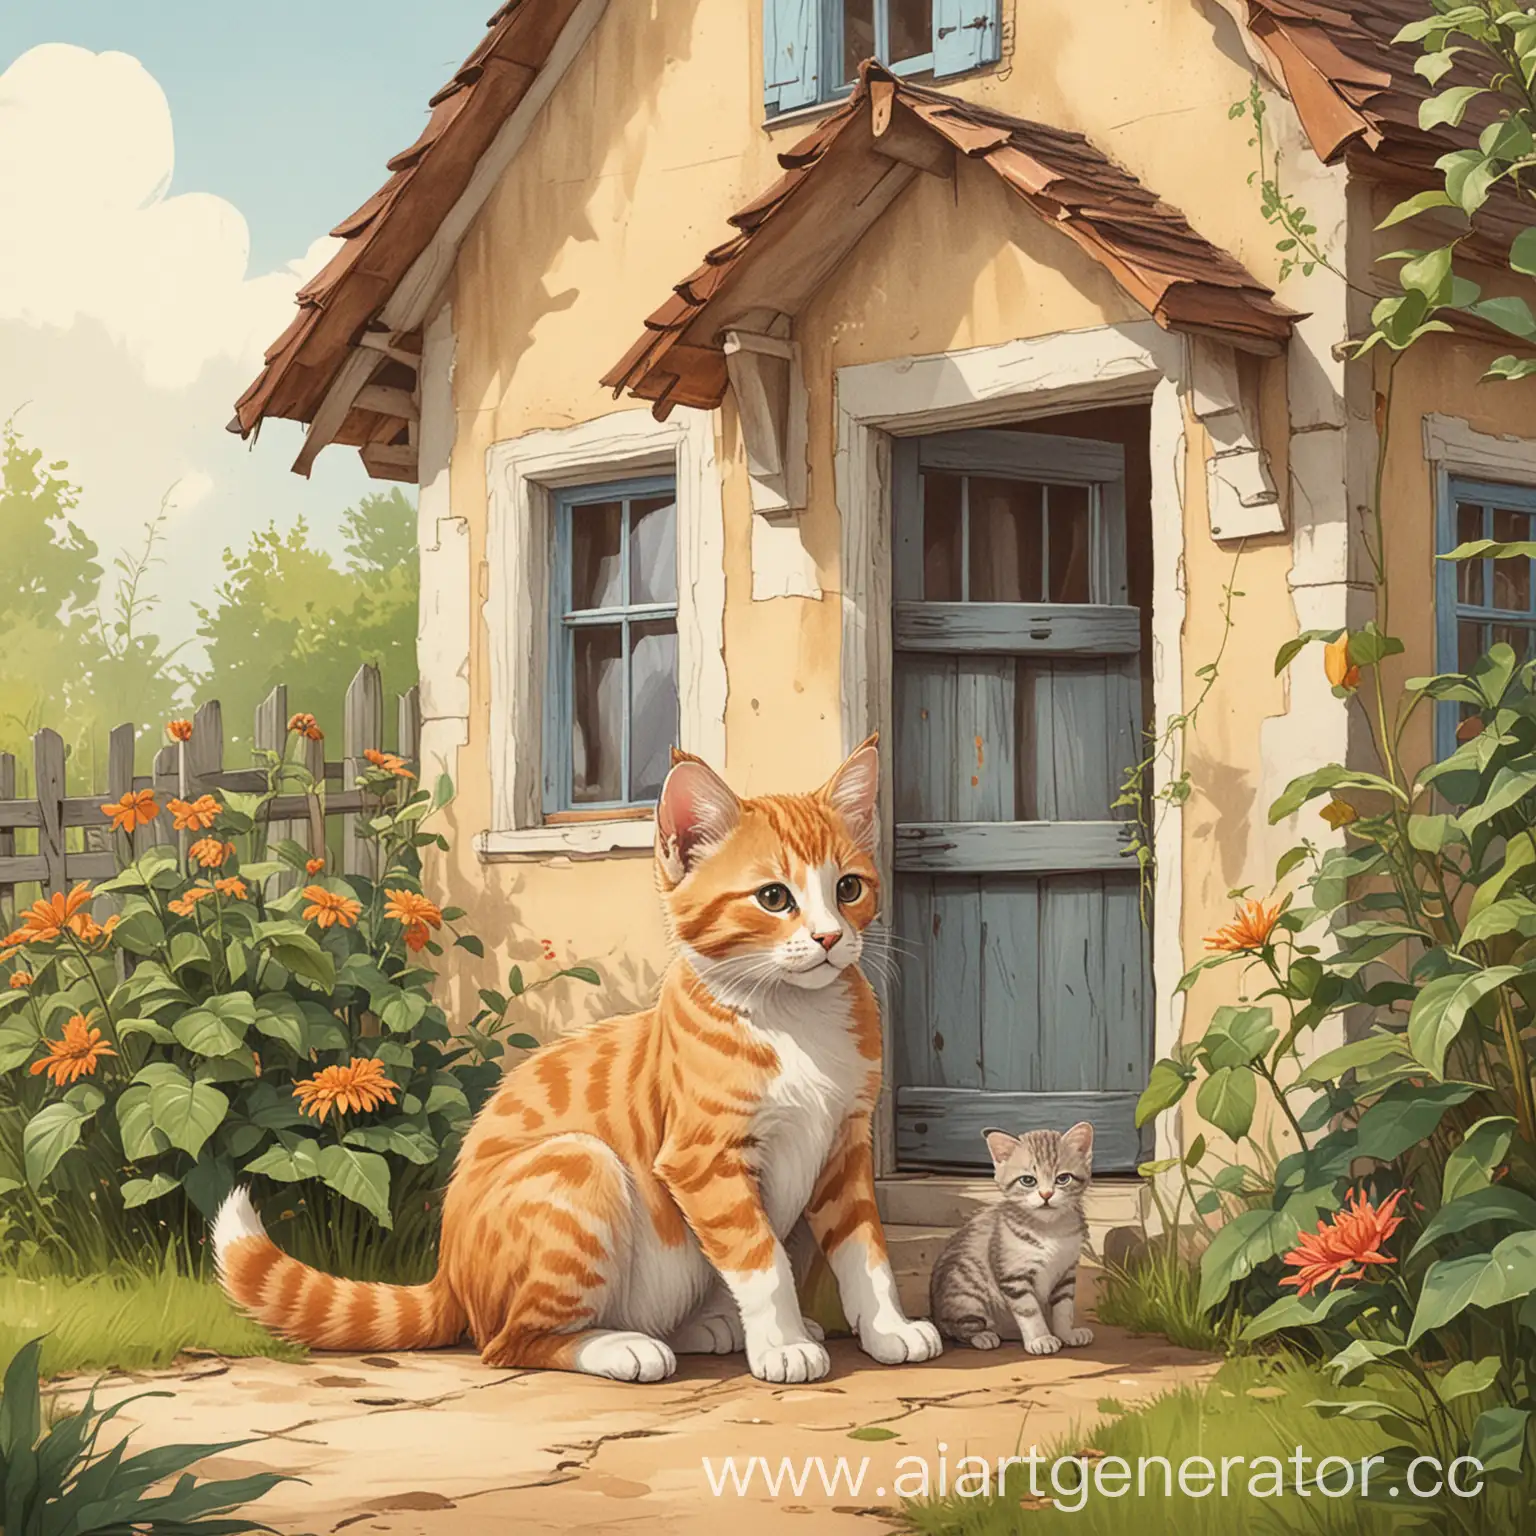 Cute-Kitten-and-Cat-by-the-Cozy-House-Charming-Illustration-for-Childrens-Book